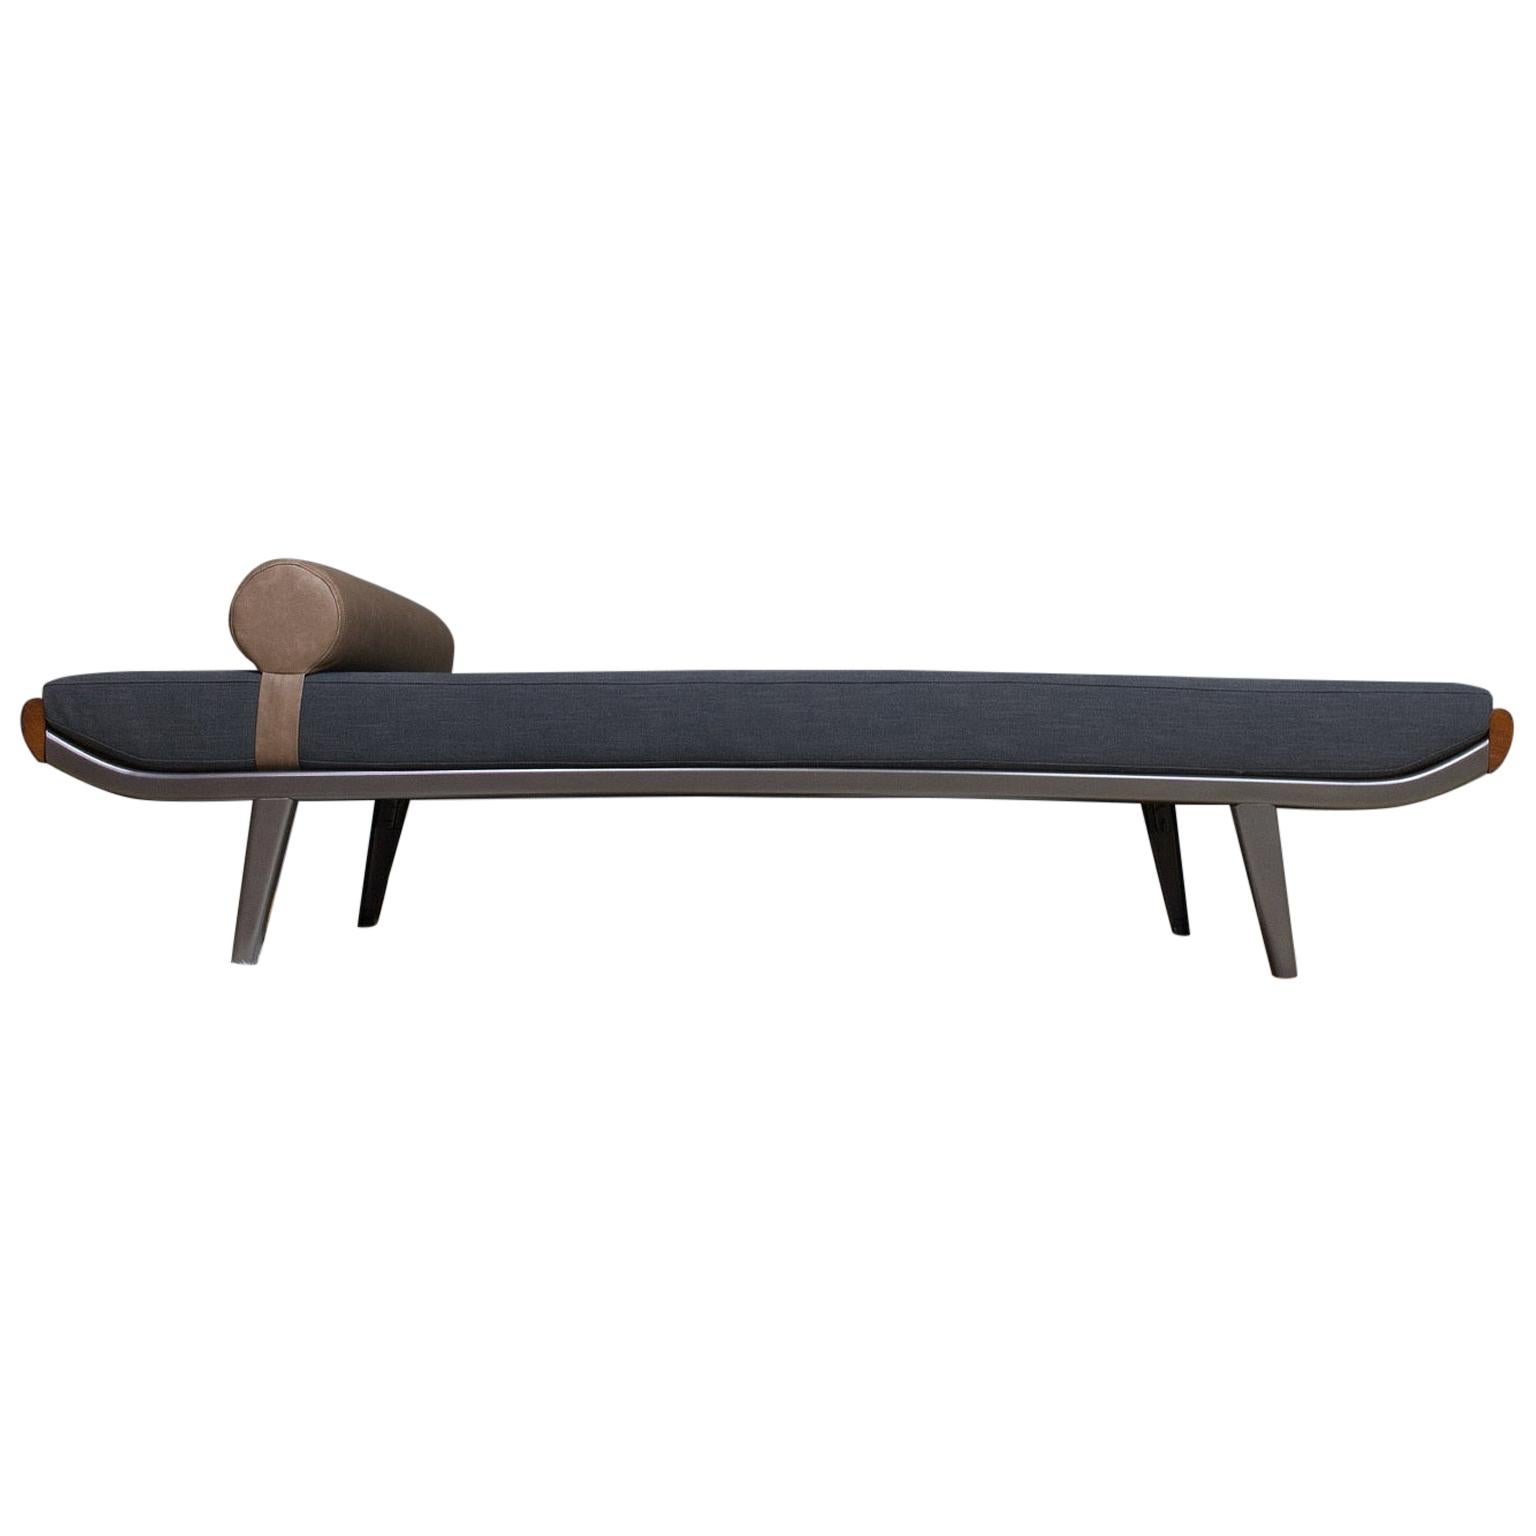 Vintage Cleopatra Daybed by Andre Cordemeyer in Charcoal Grey Linen, 1953 For Sale